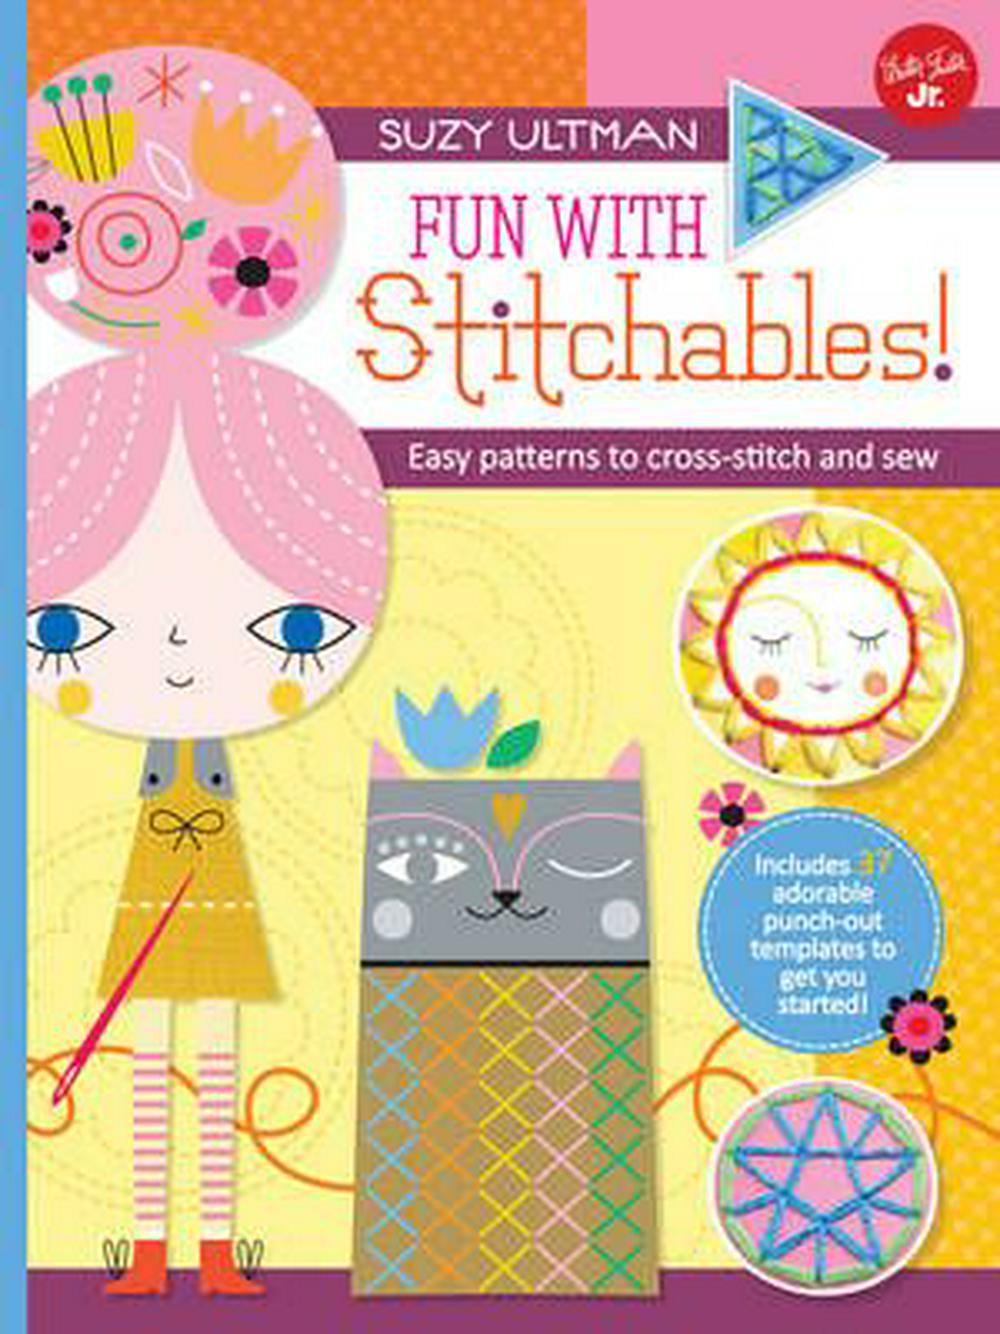 Fun Embroidery Patterns Fun With Stitchables Easy Patterns To Cross Stitch And Sew